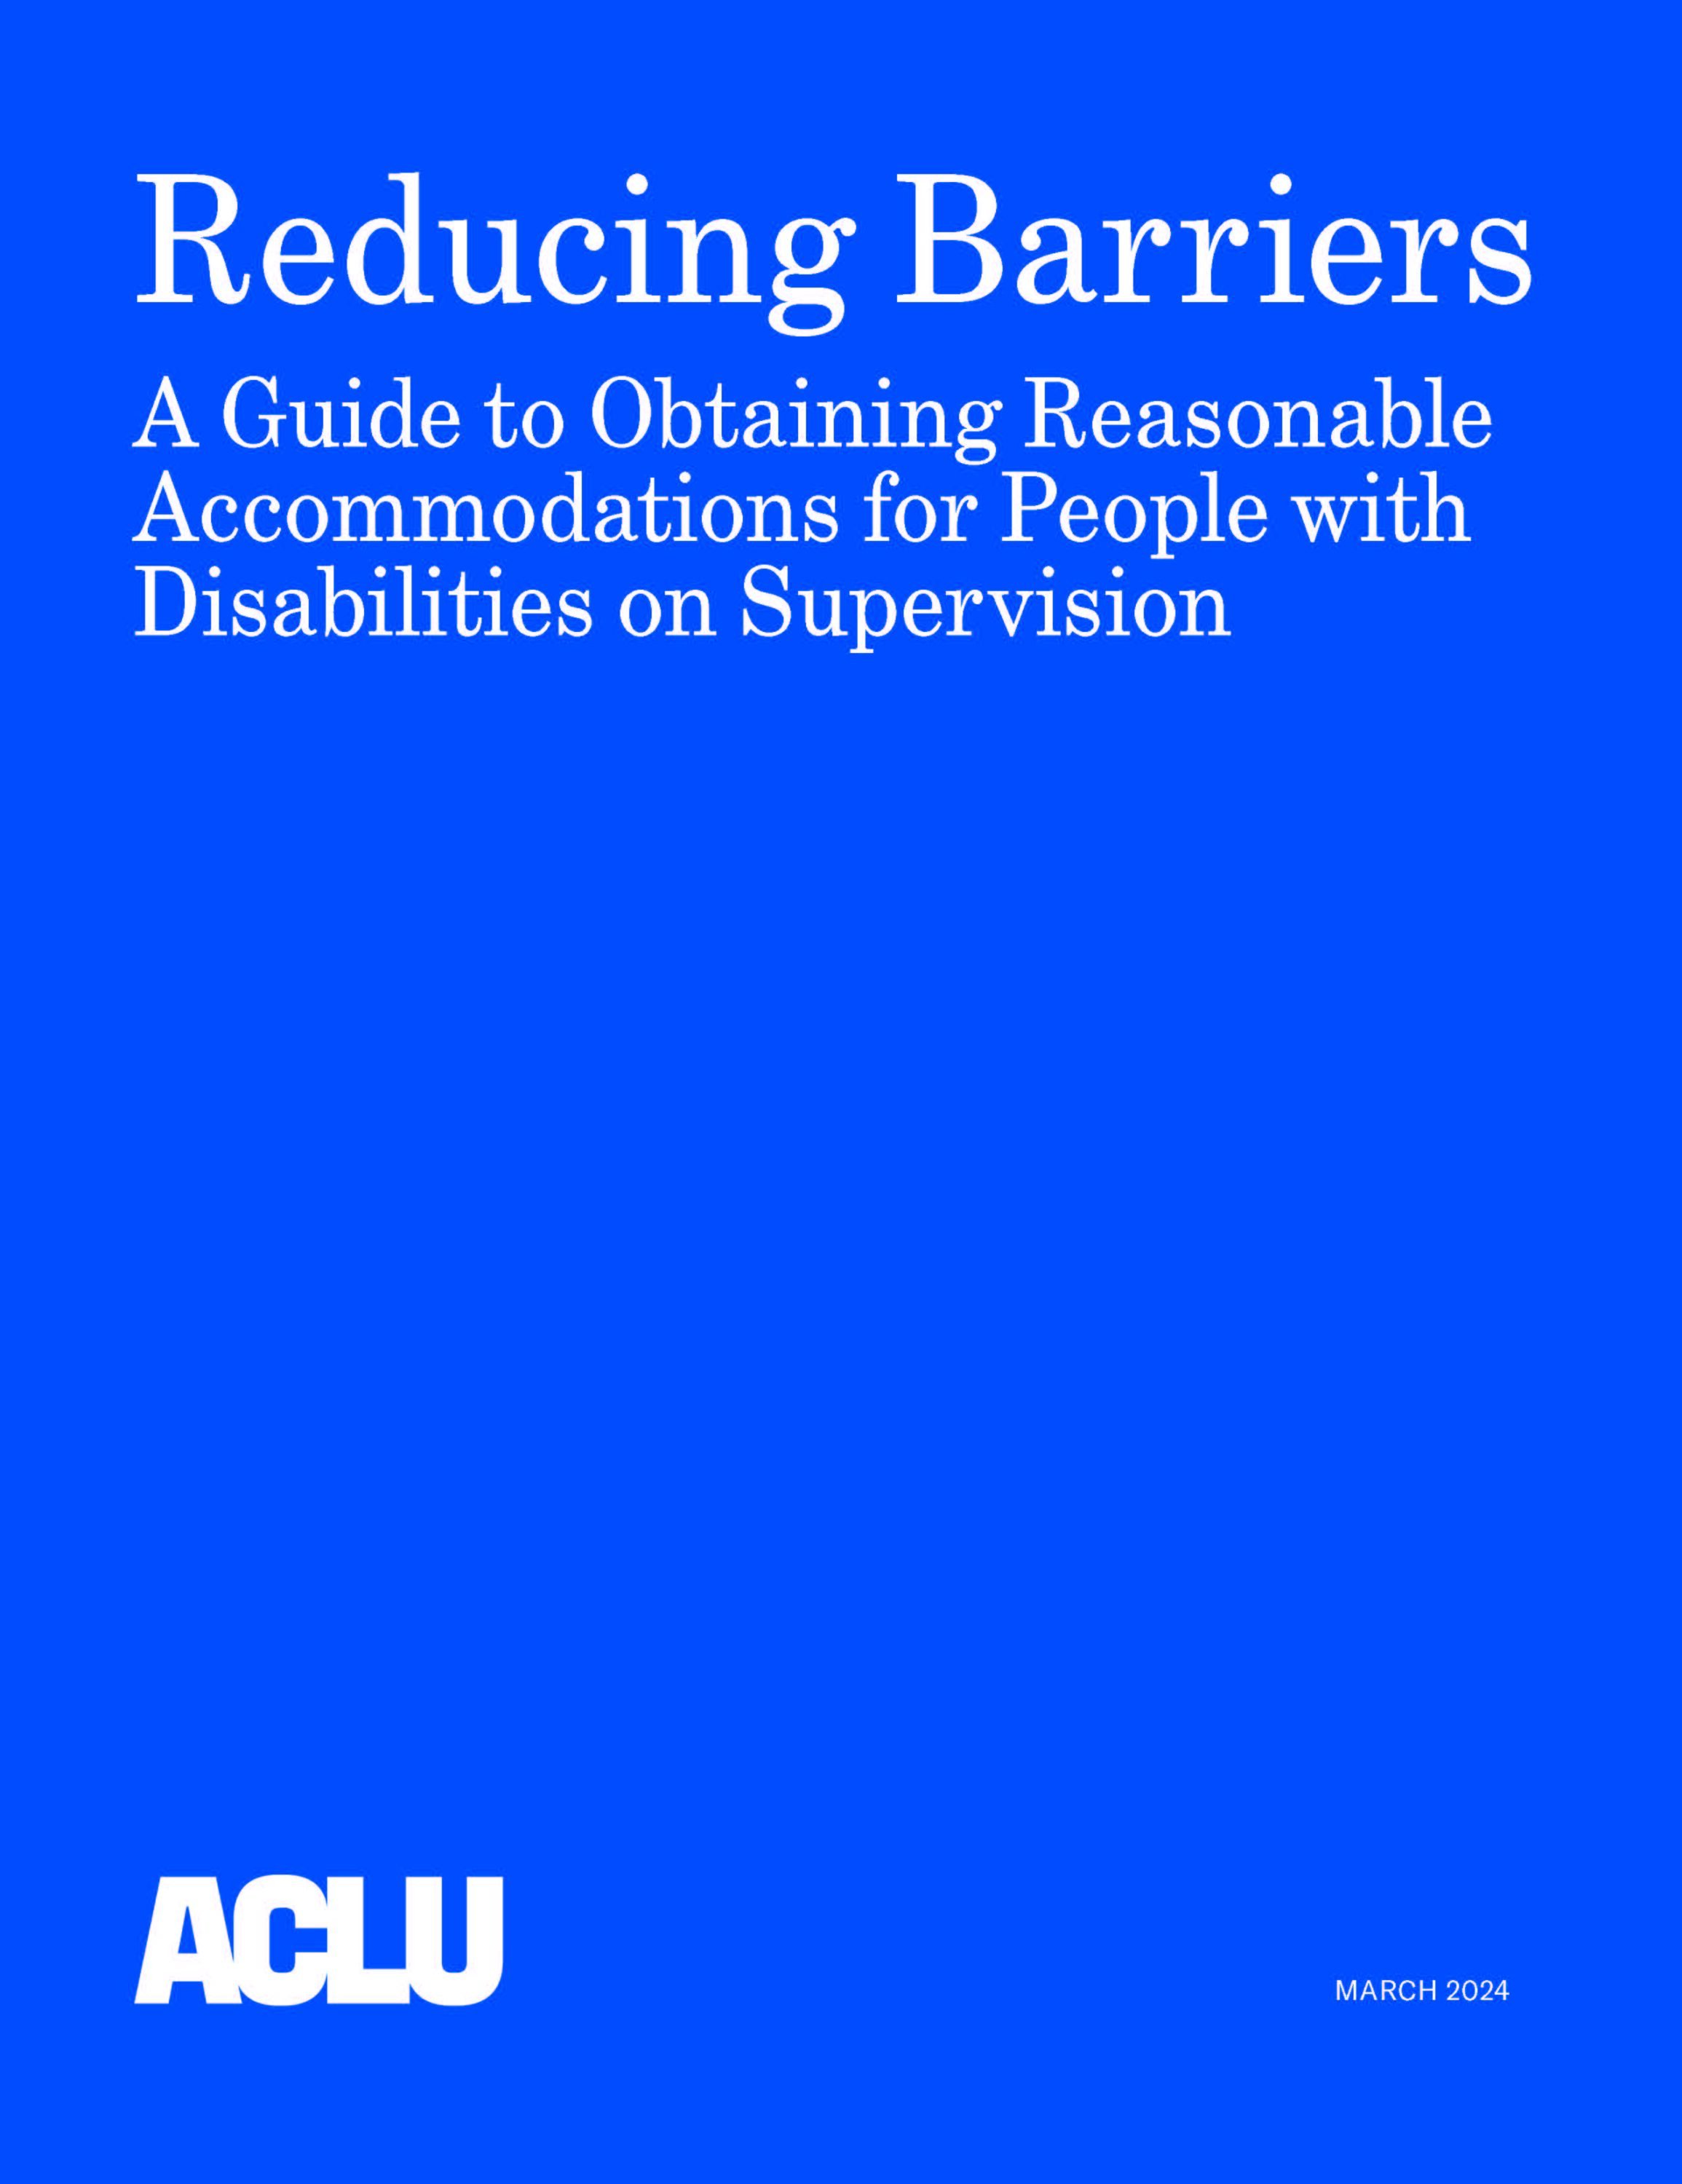 Blue background with the words "Reducing Barriers: A Guide to Obtaining Reasonable Accommodations for People with Disabilities on Supervision" followed by an ACLU logo and the date March 2024 in the bottom left and right corners, respectively.